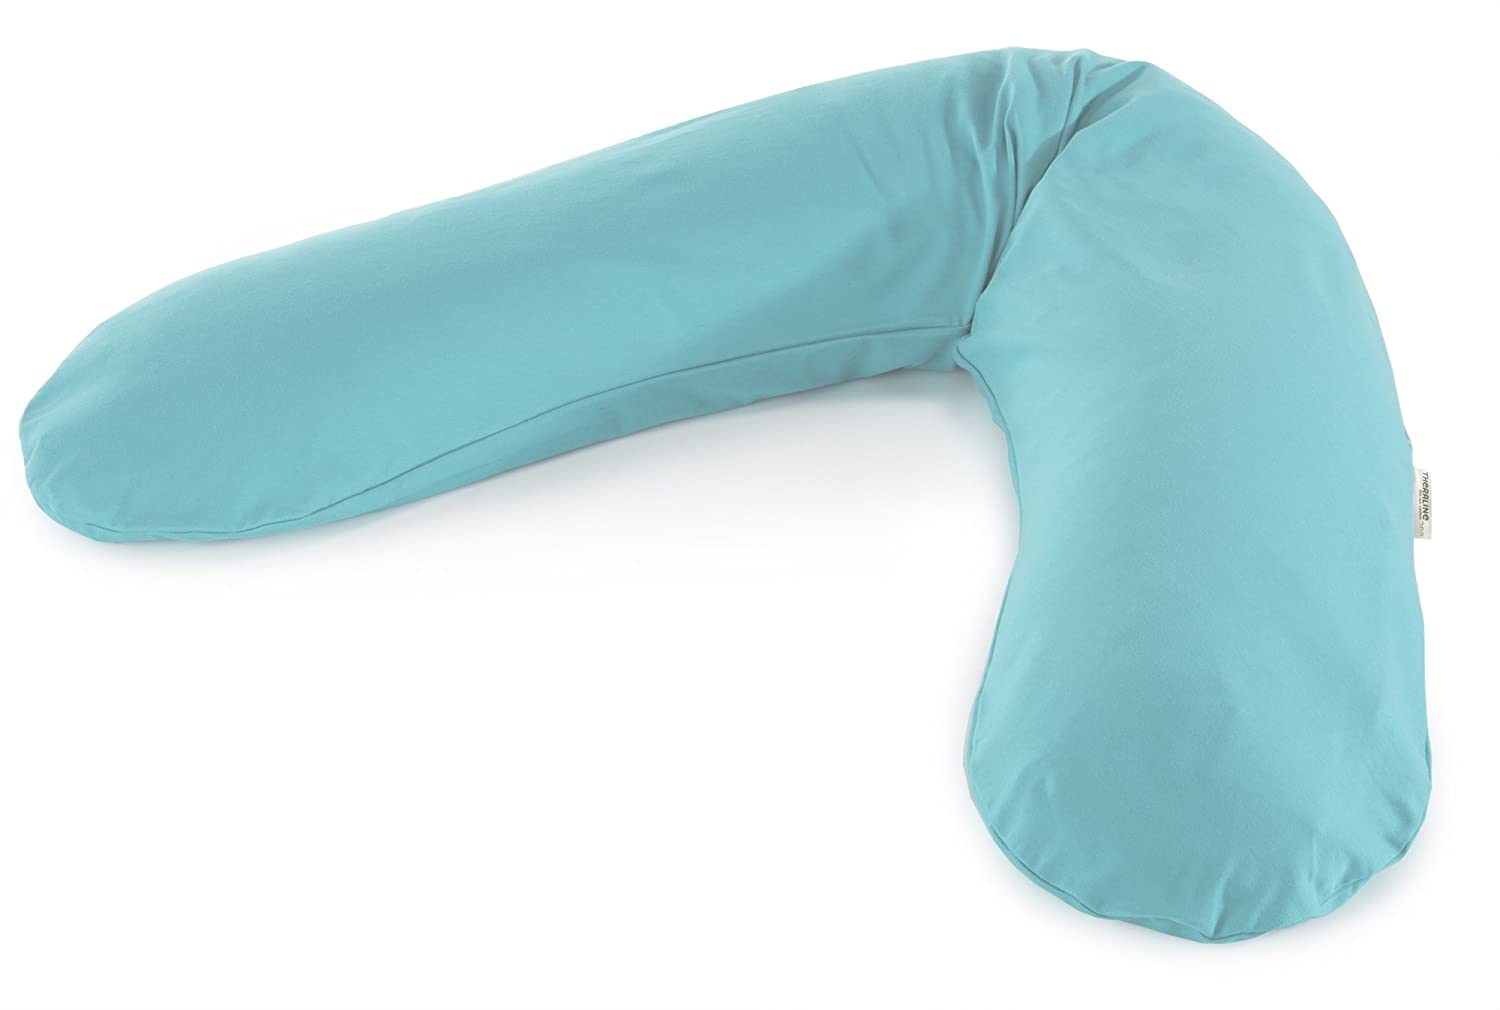 Theraline The Original 190 cm Pillow 13 turquoise